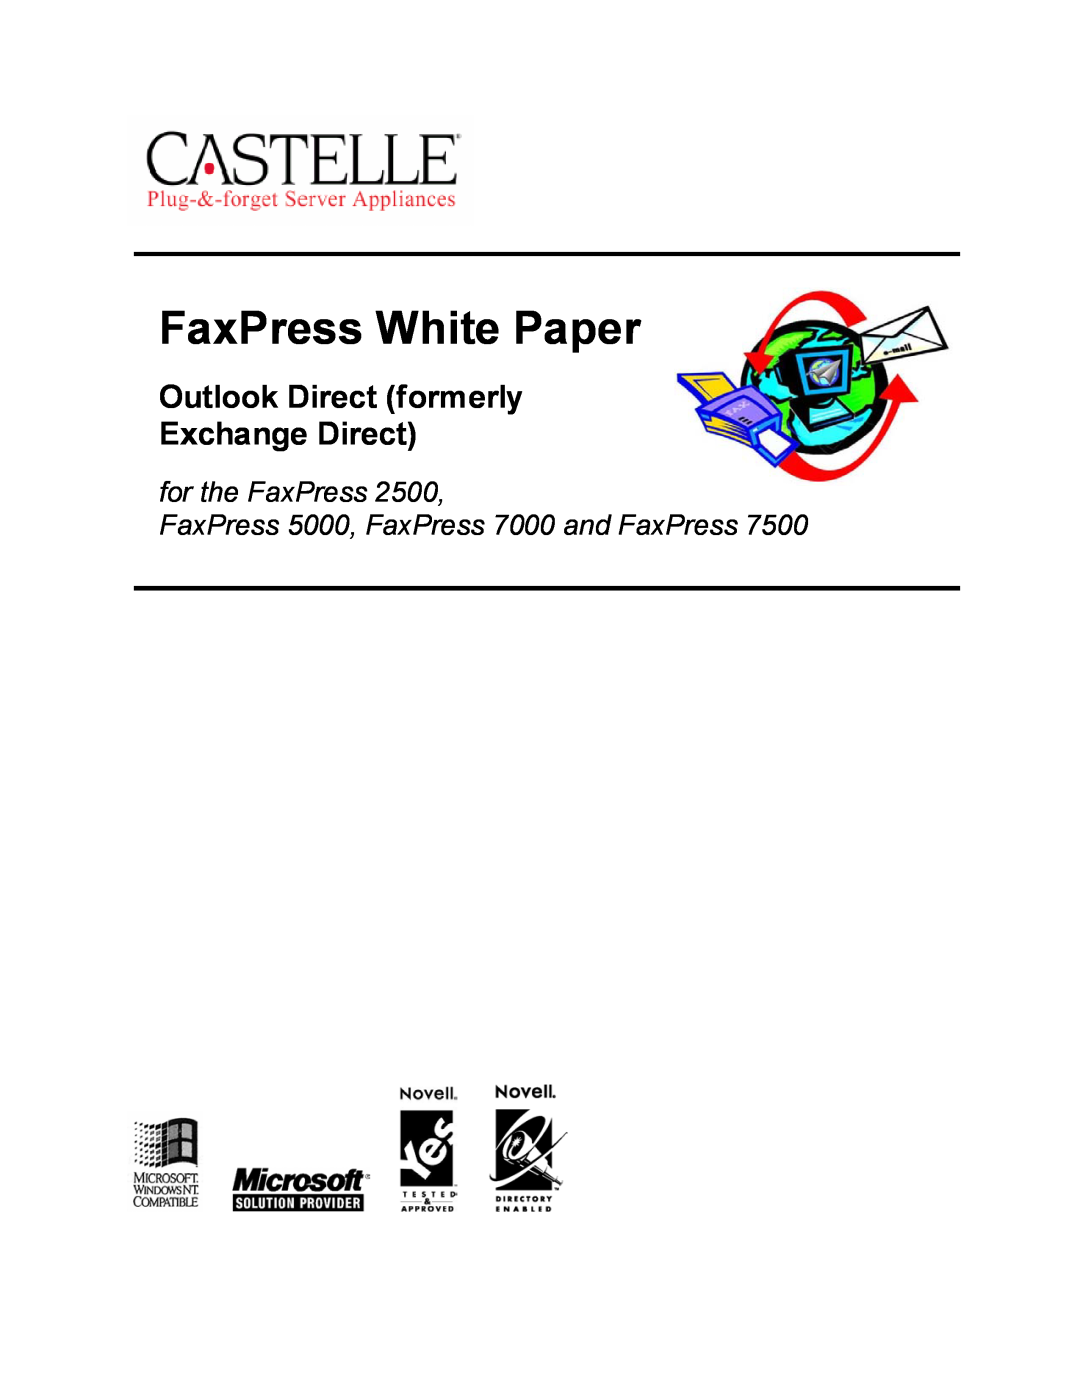 Castelle 7000, 7500, 2500, 5000 manual FaxPress White Paper, Outlook Direct formerly Exchange Direct 